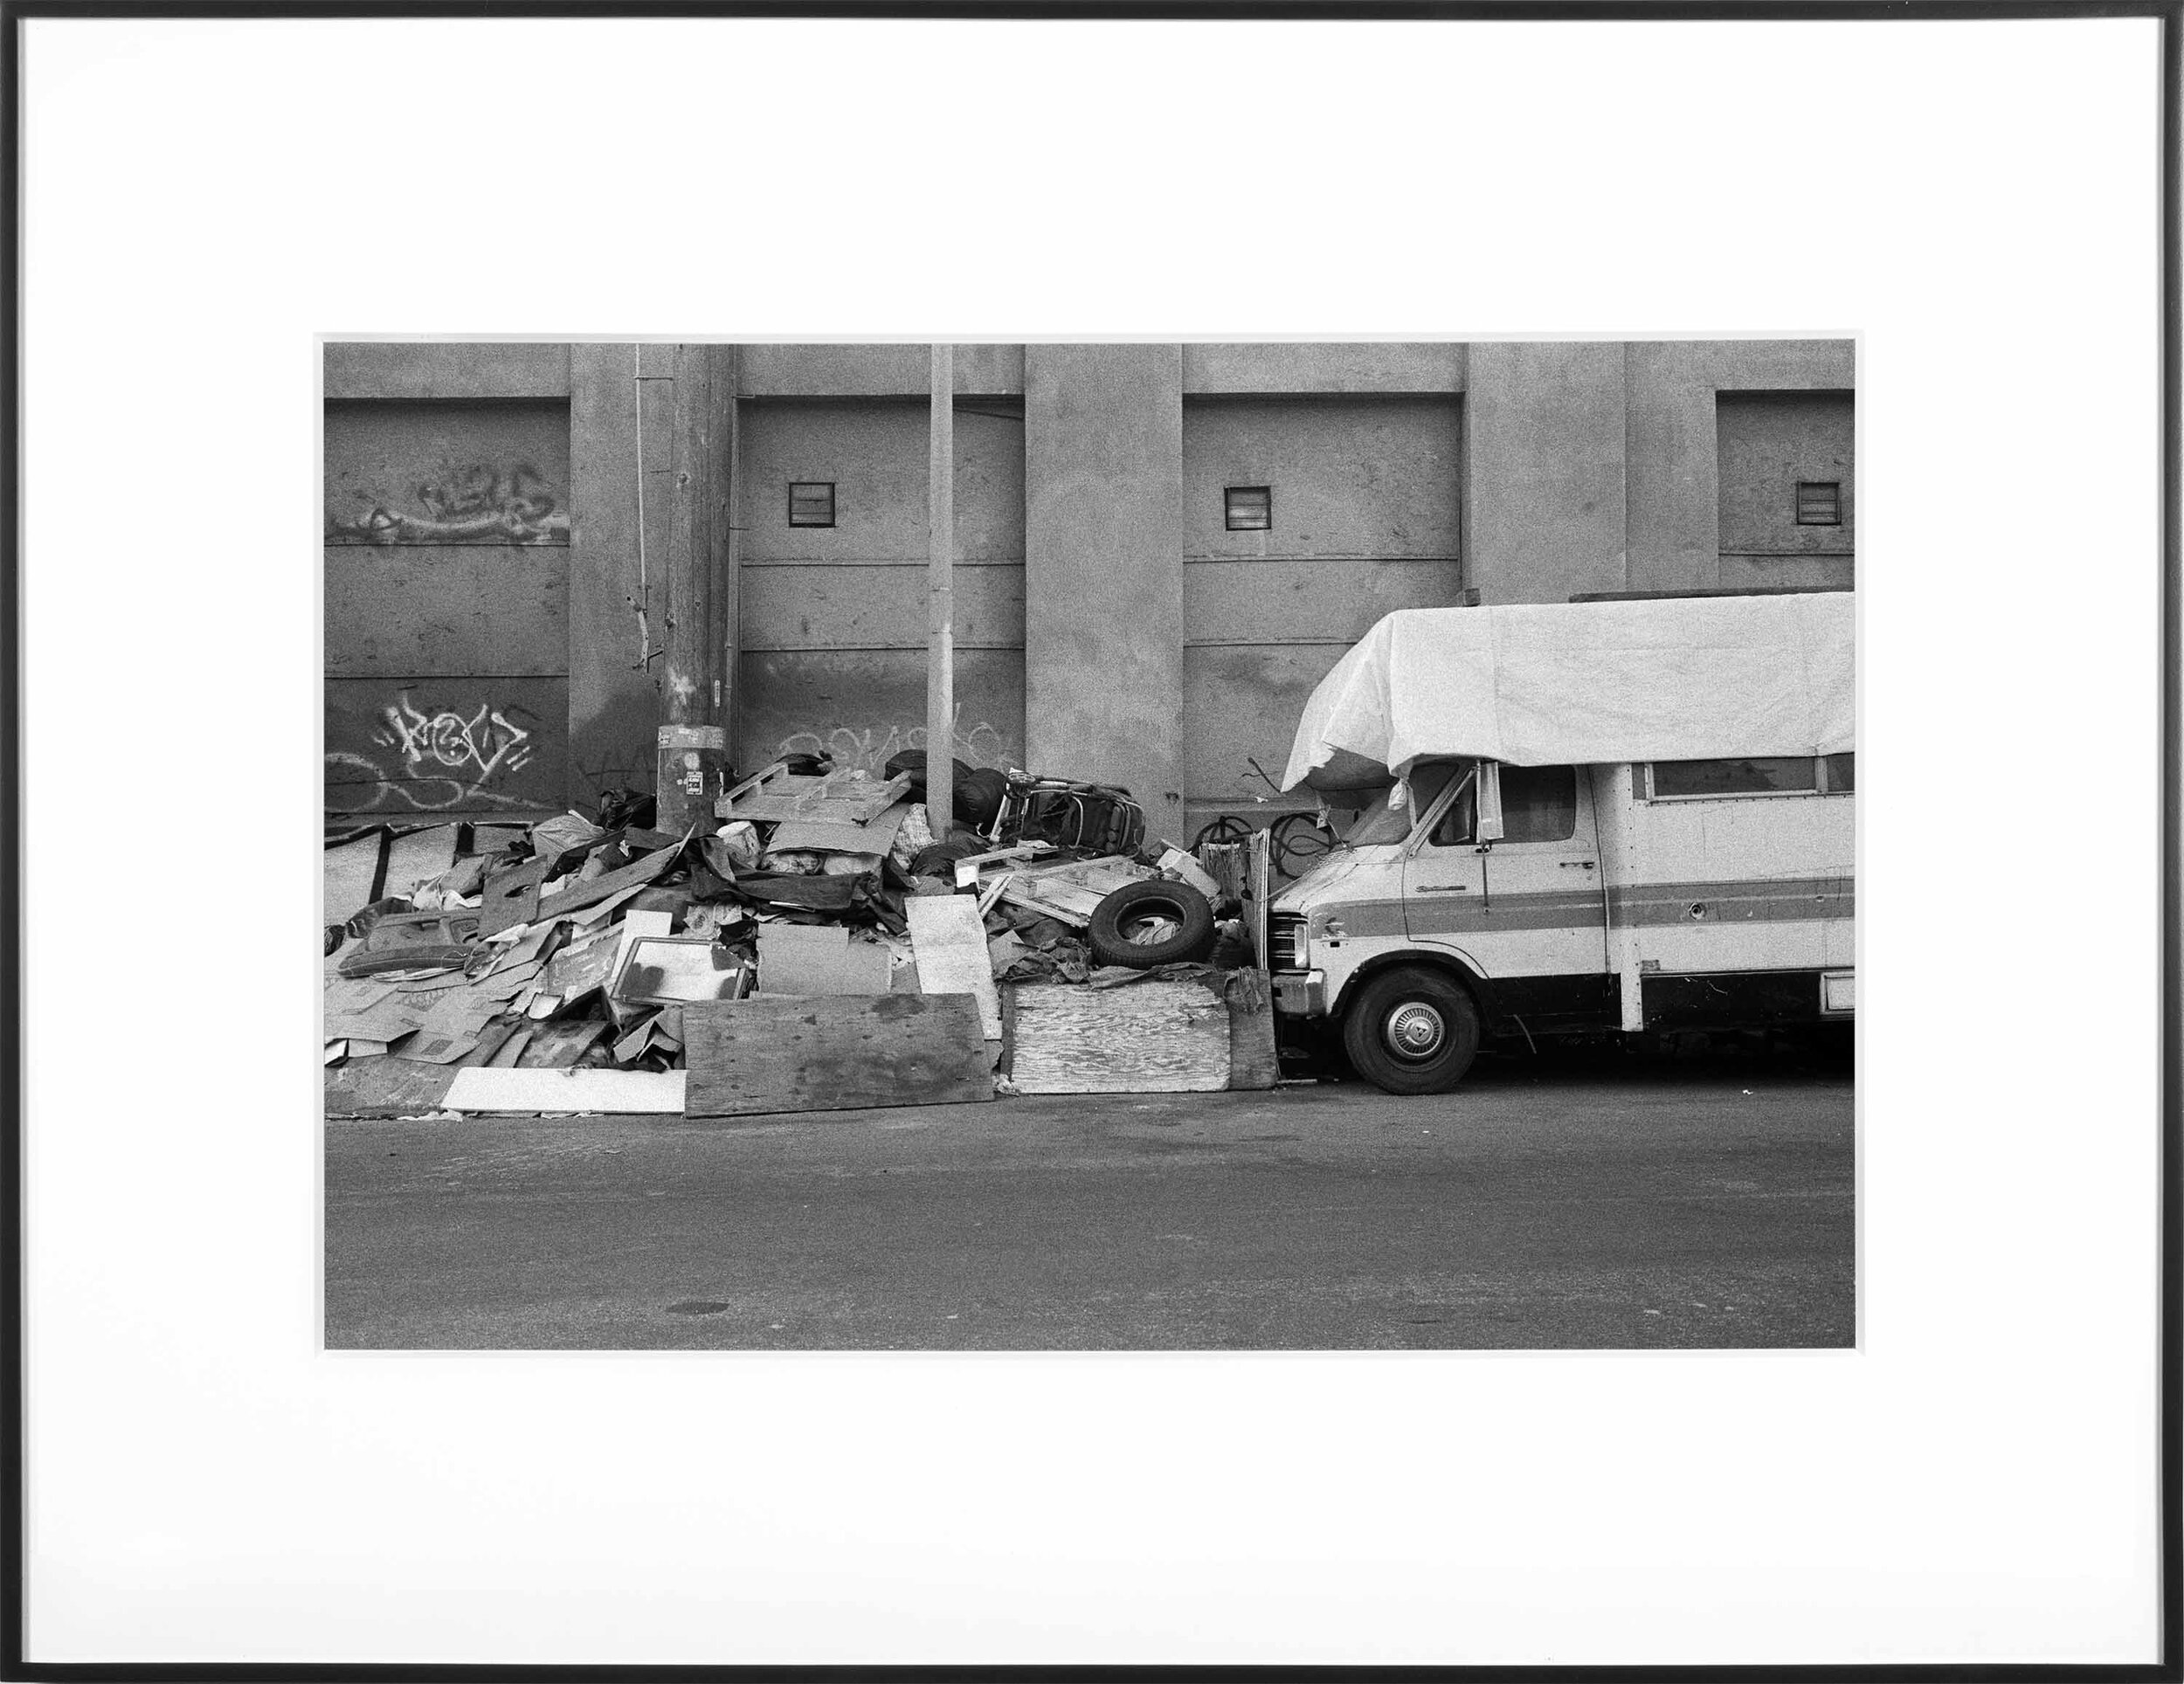   (Temporary) Homes for America: 3300 block to 4400 block, Union Pacific Avenue, between South Grande Vista Avenue and South Marianna Avenue, Los Angeles/Commerce, California, December 2020   2021  black and white fiber print  11 x 15 inches  Exhibit